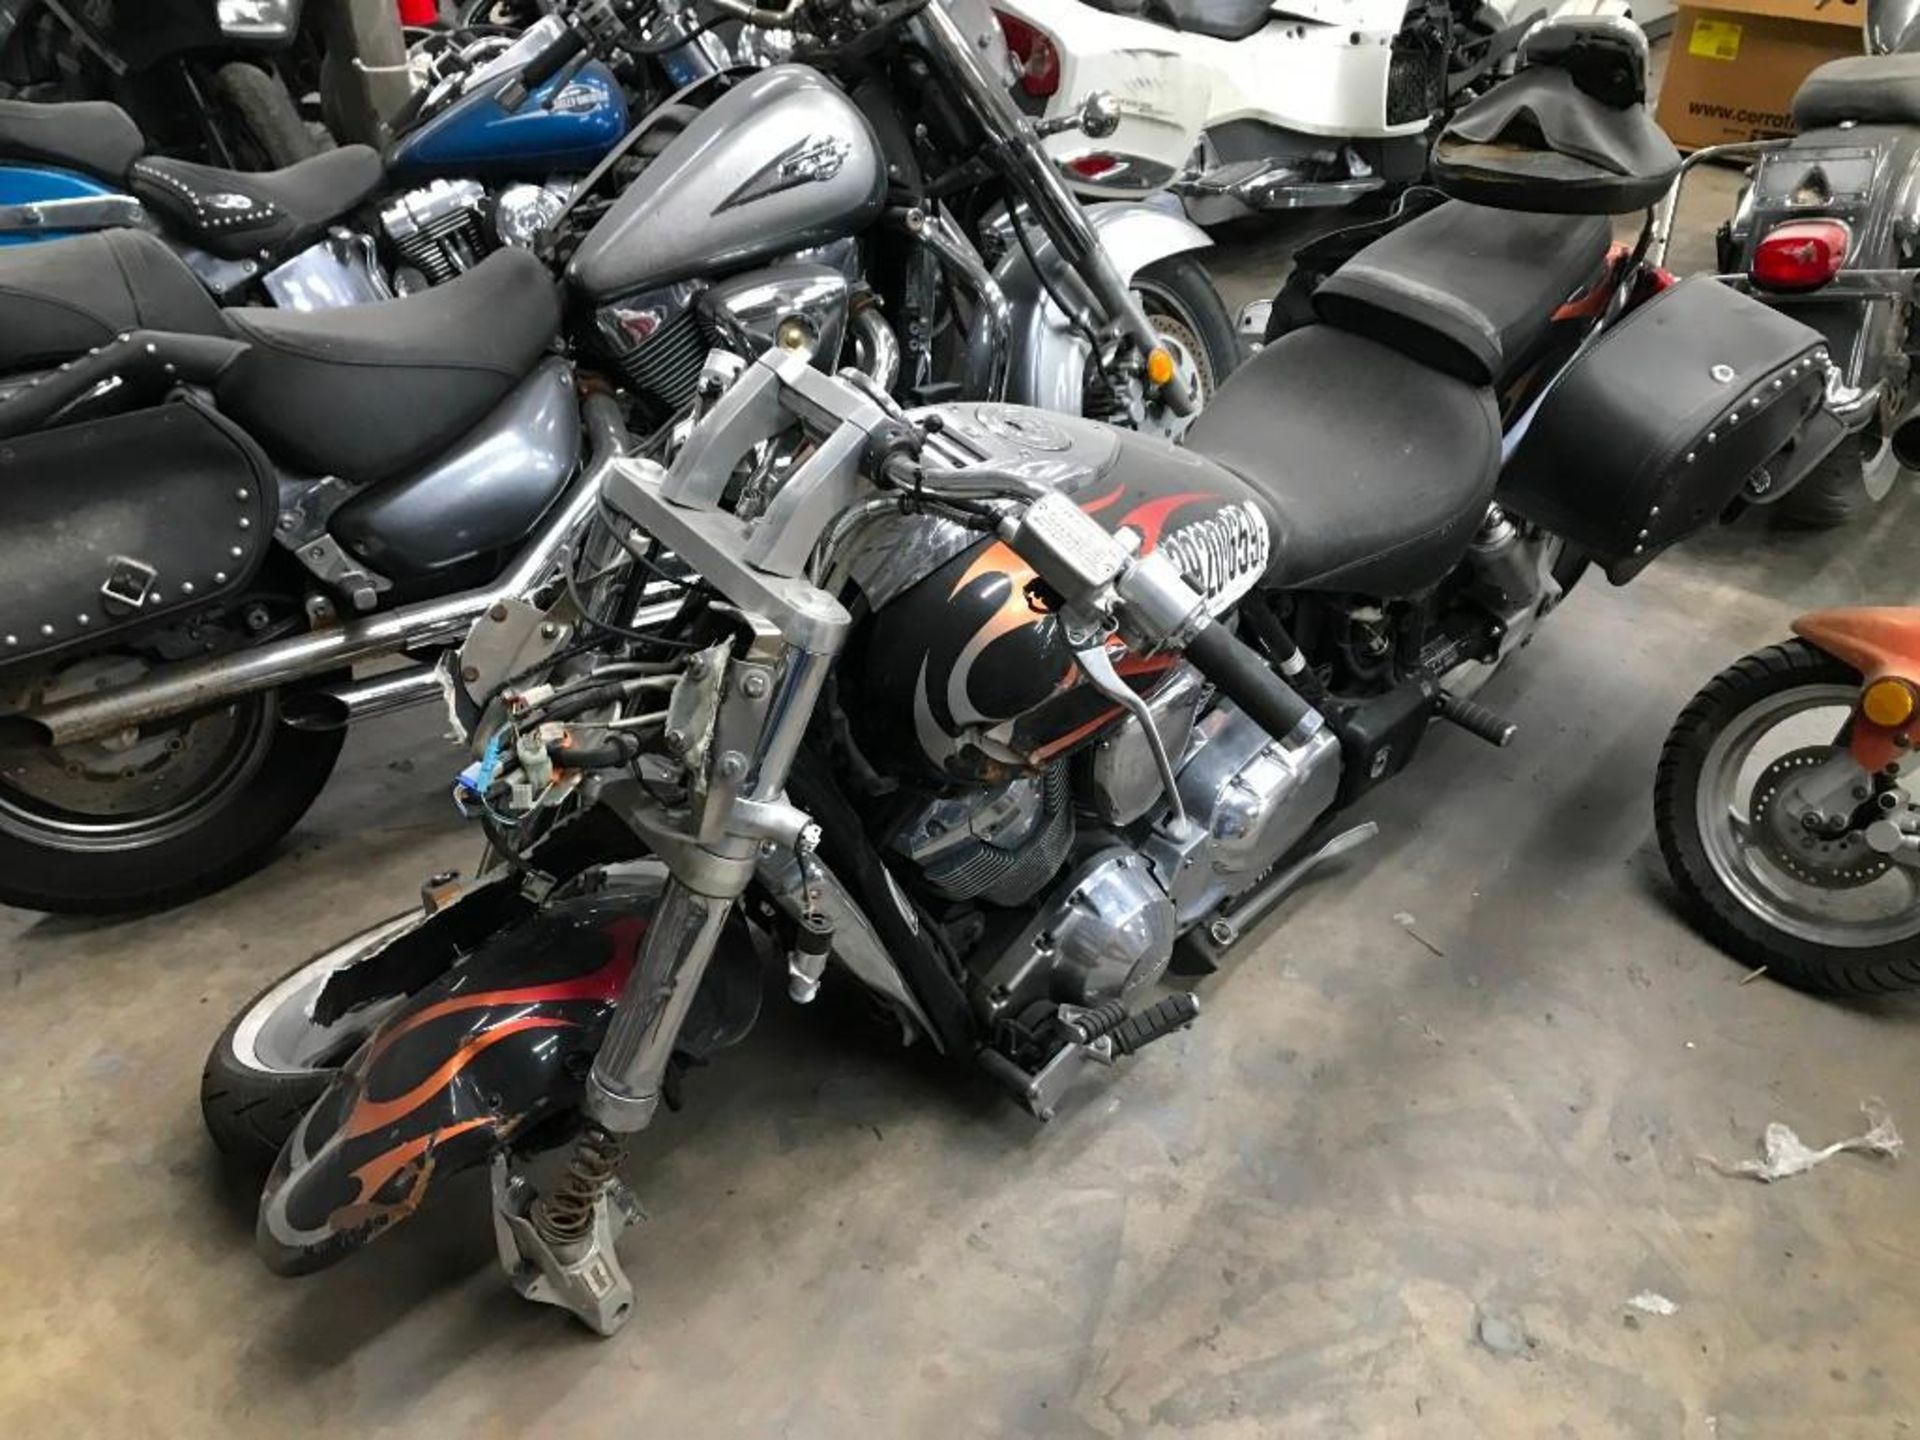 2006 HONDA VTX1800C2 MOTORCYCLE (PARTS ONLY) - Image 9 of 18